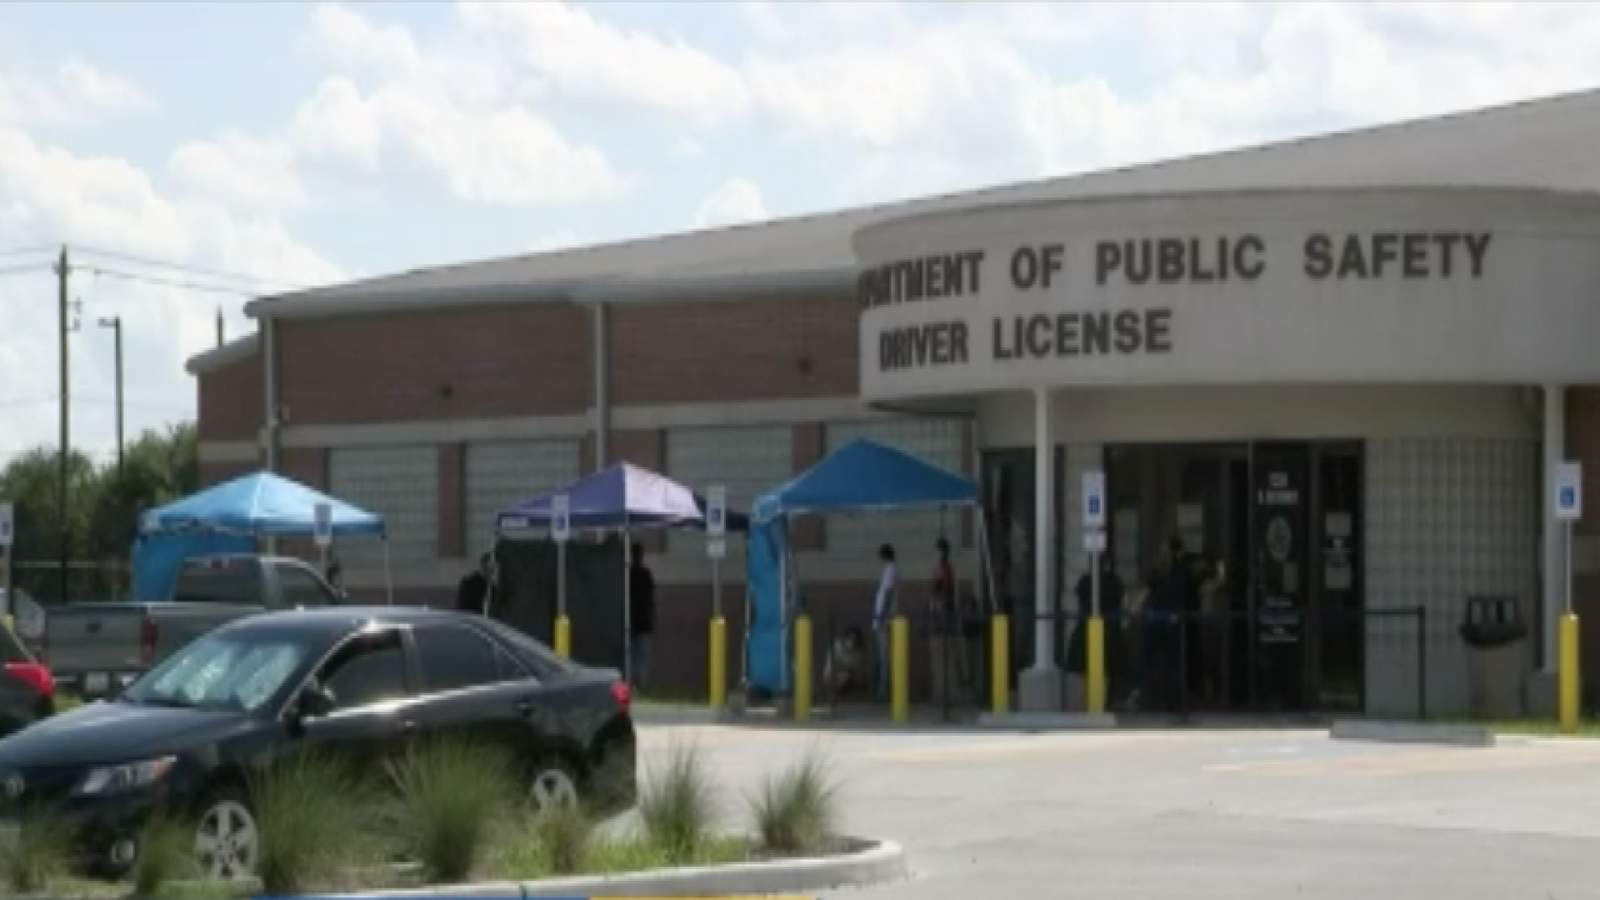 Texans face delays of weeks, months to renew drivers licenses